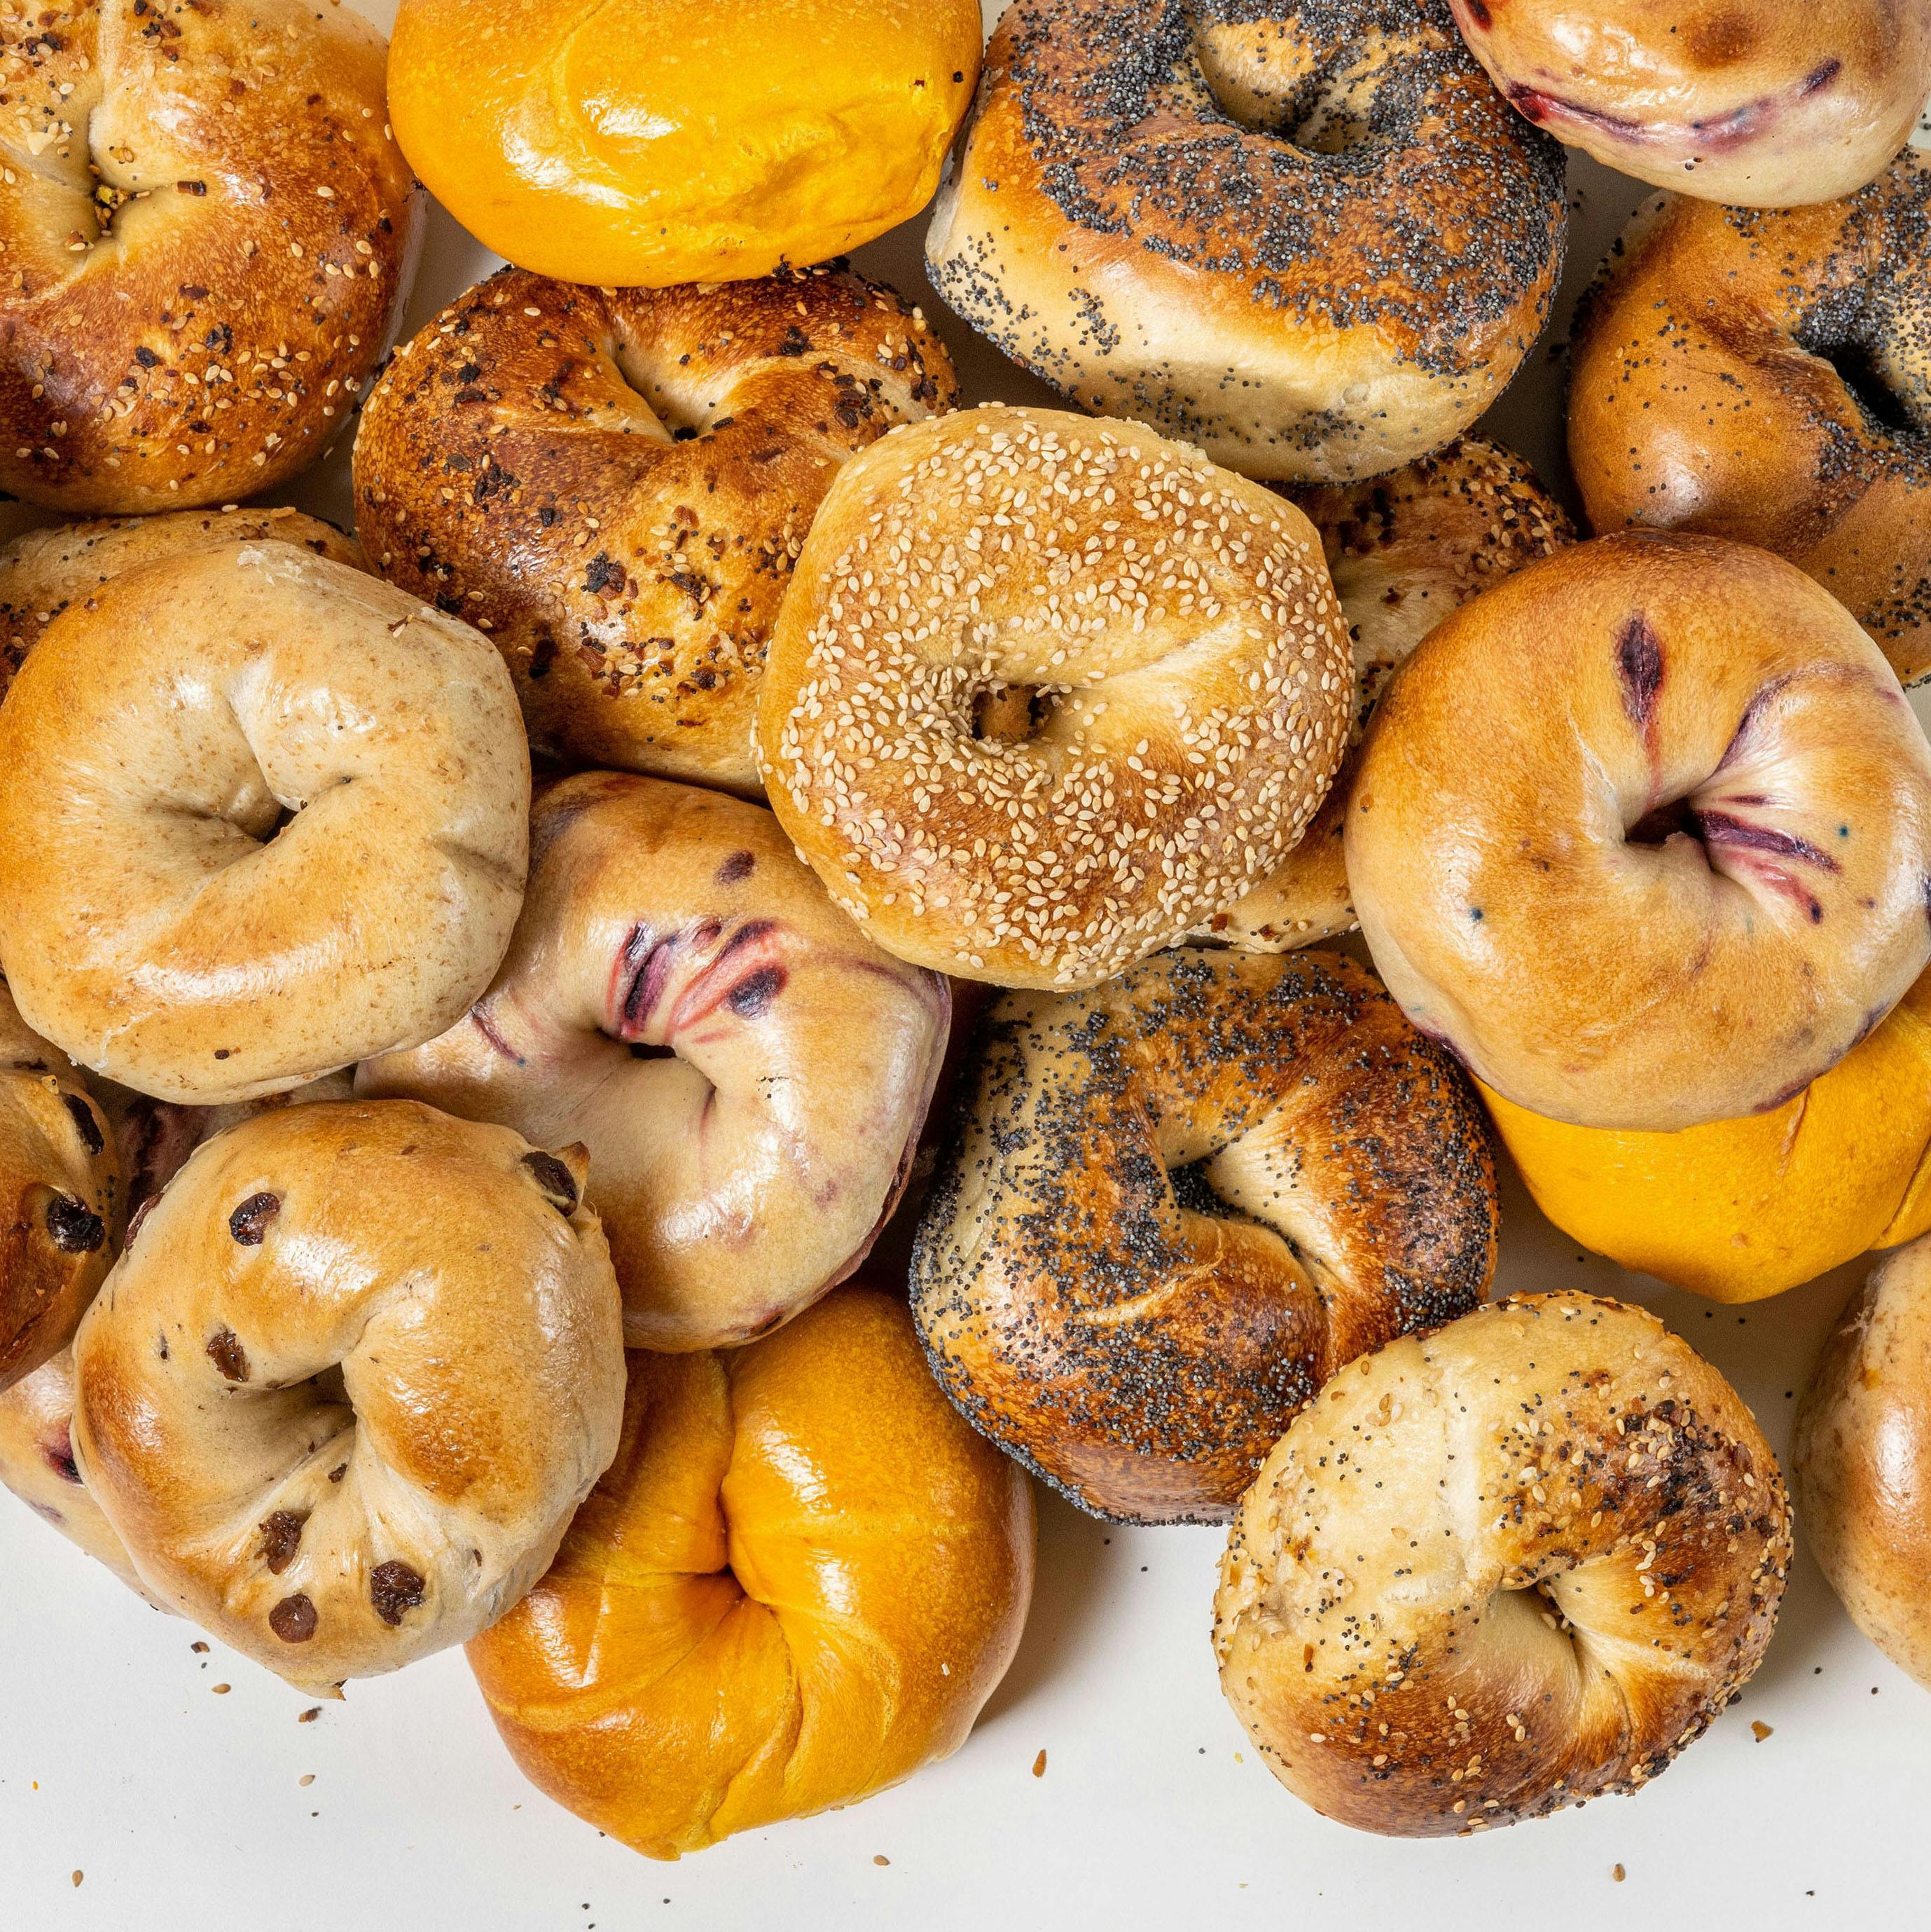 New York Bagels - Hand Rolled, Free 2-day Shipping